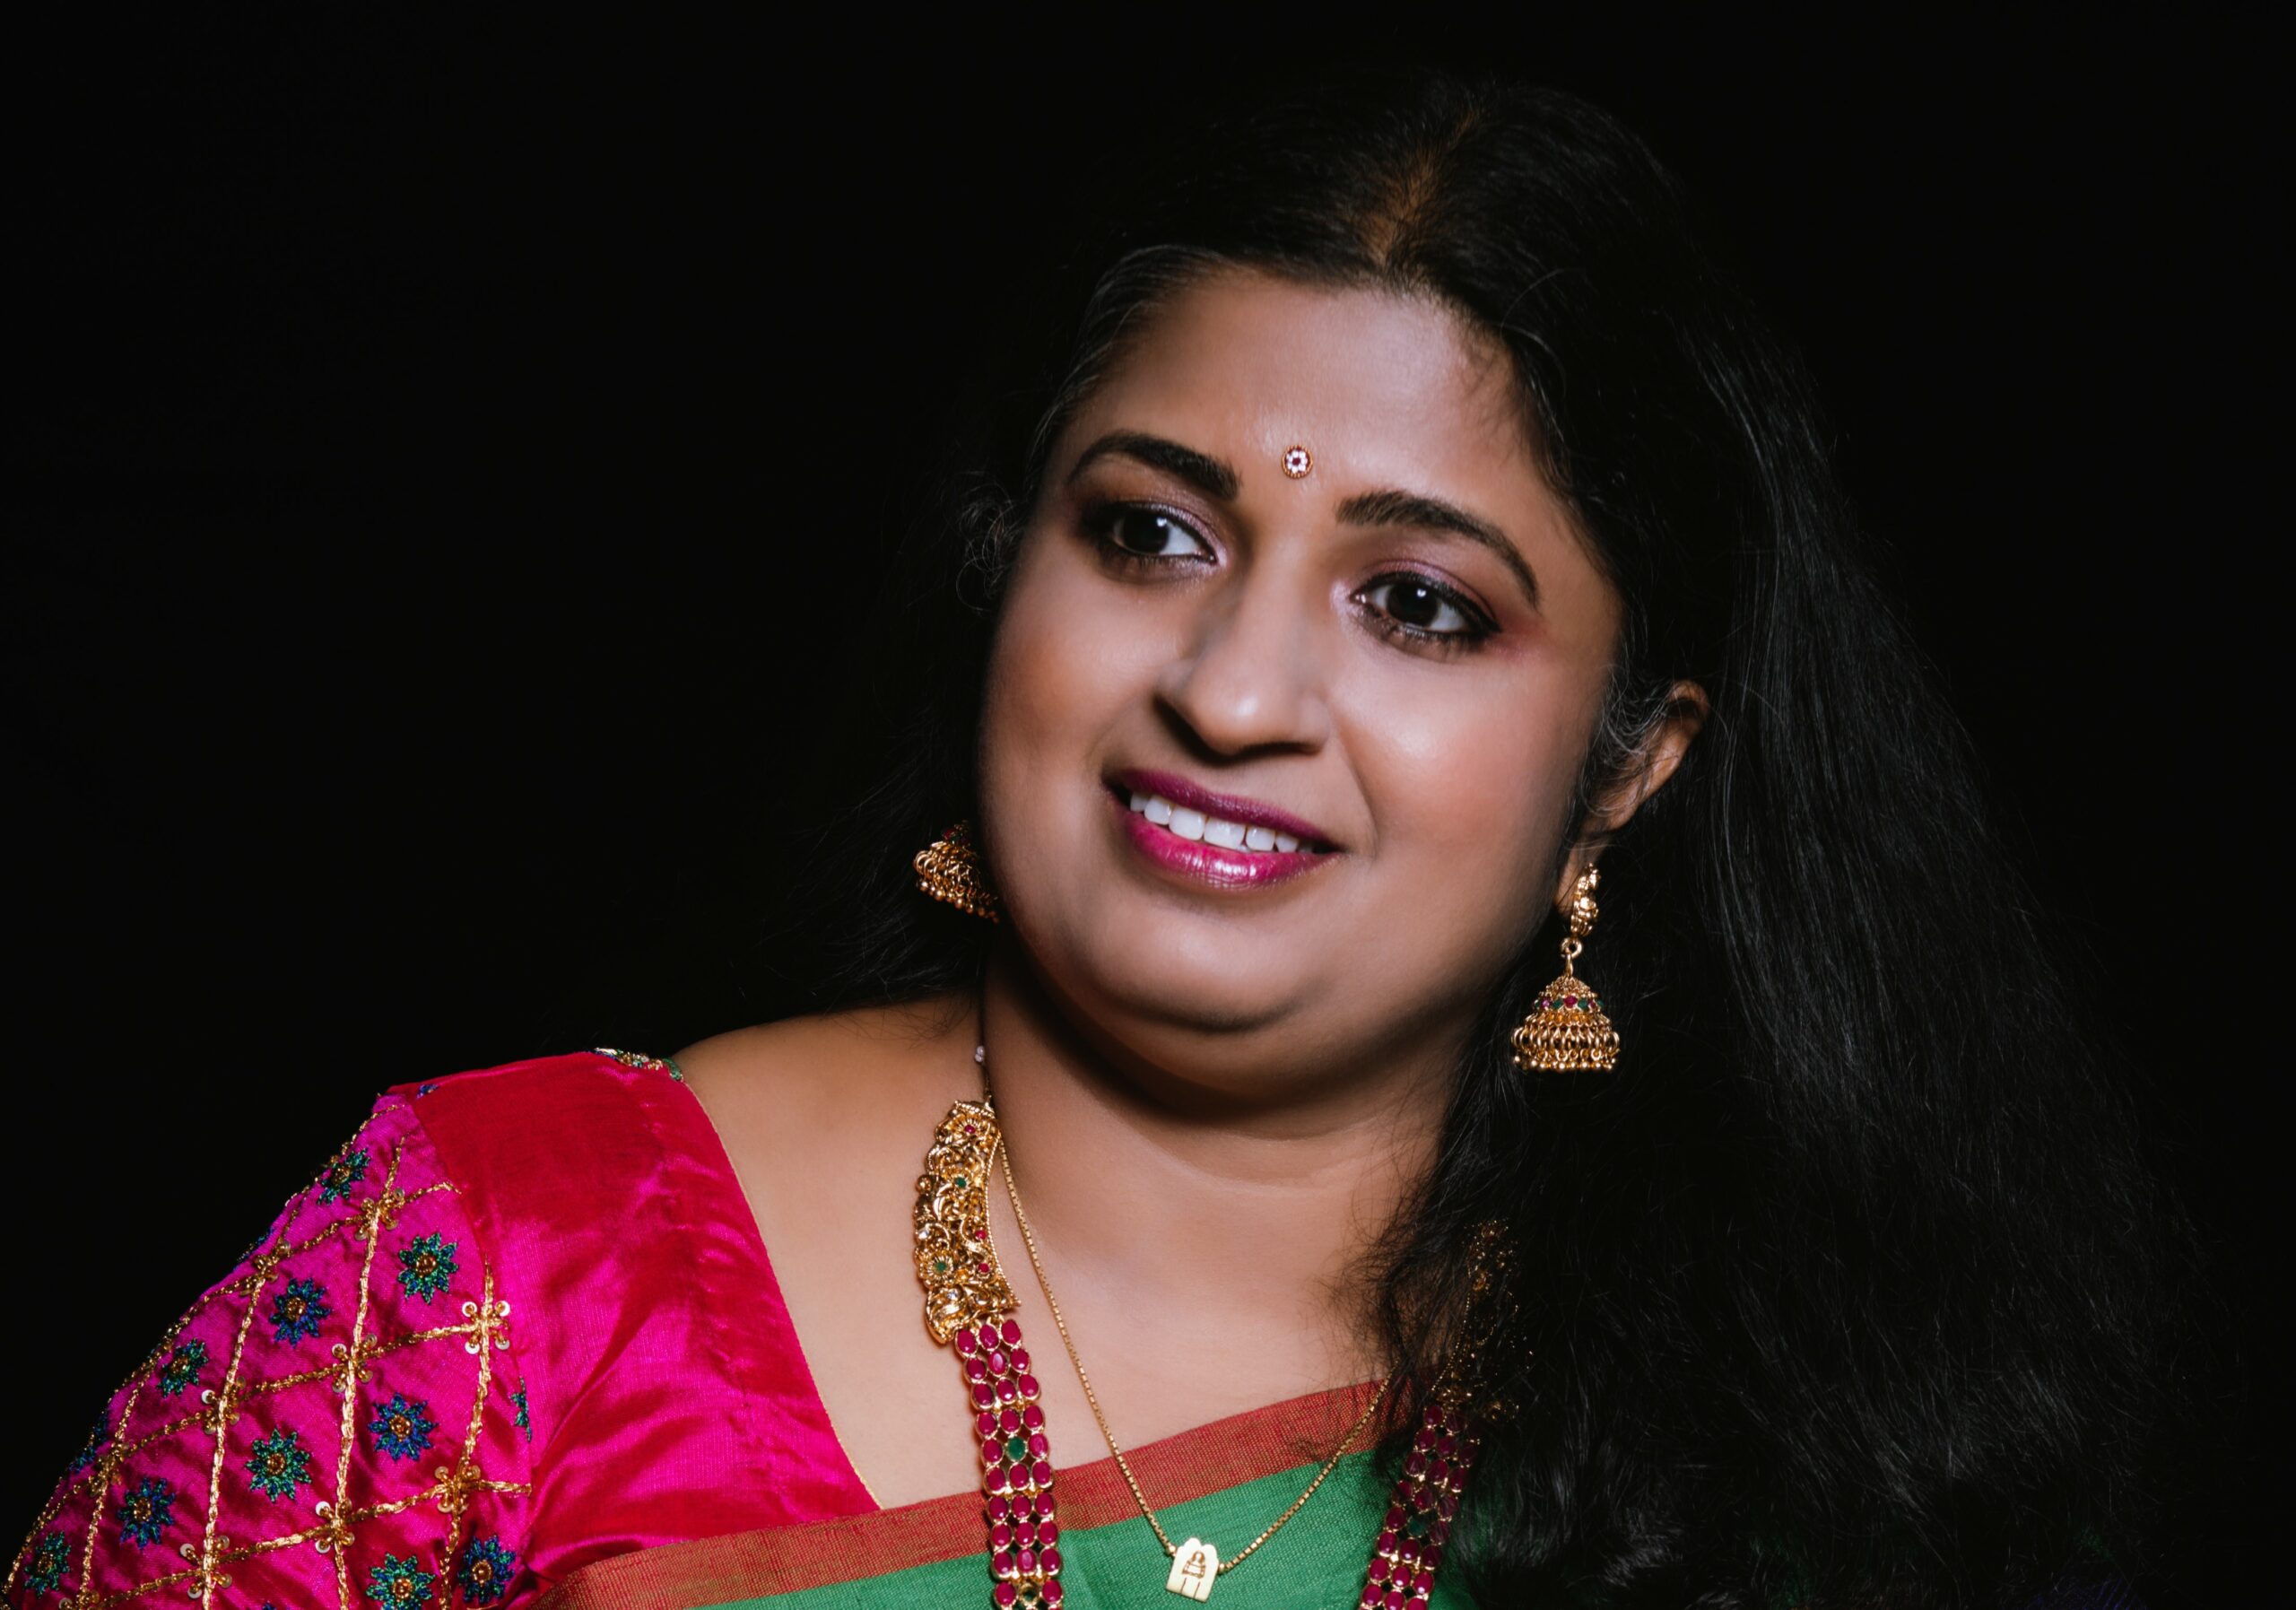 “My plan is to record and publish as many albums as I can on Carnatic music” – Kavitha Jayaraman